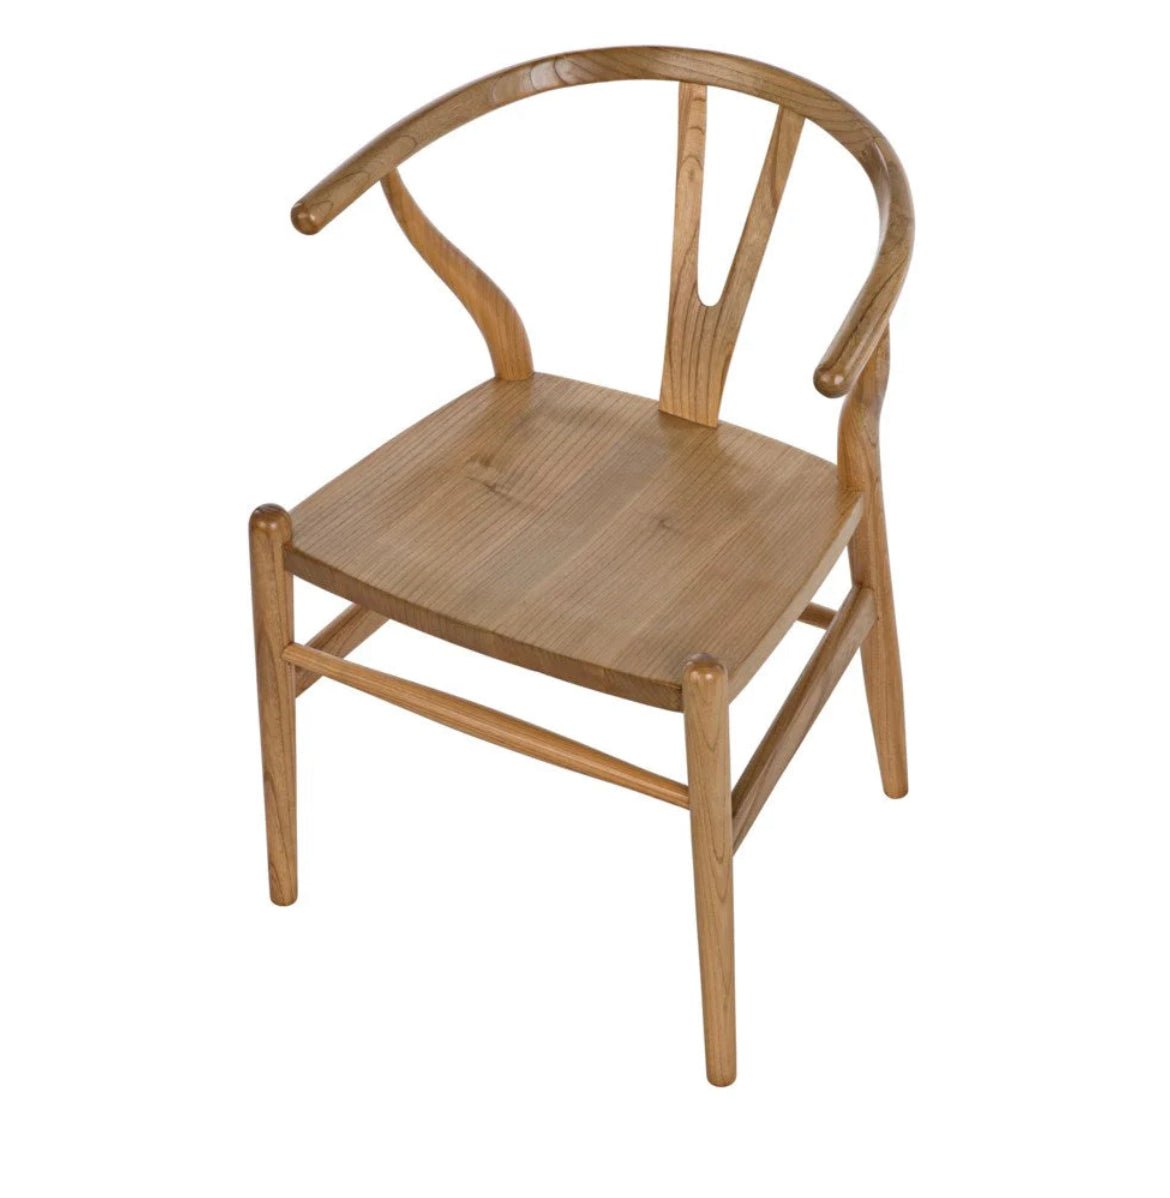 ‘Zola’ Chair (Natural) - EcoLuxe Furnishings